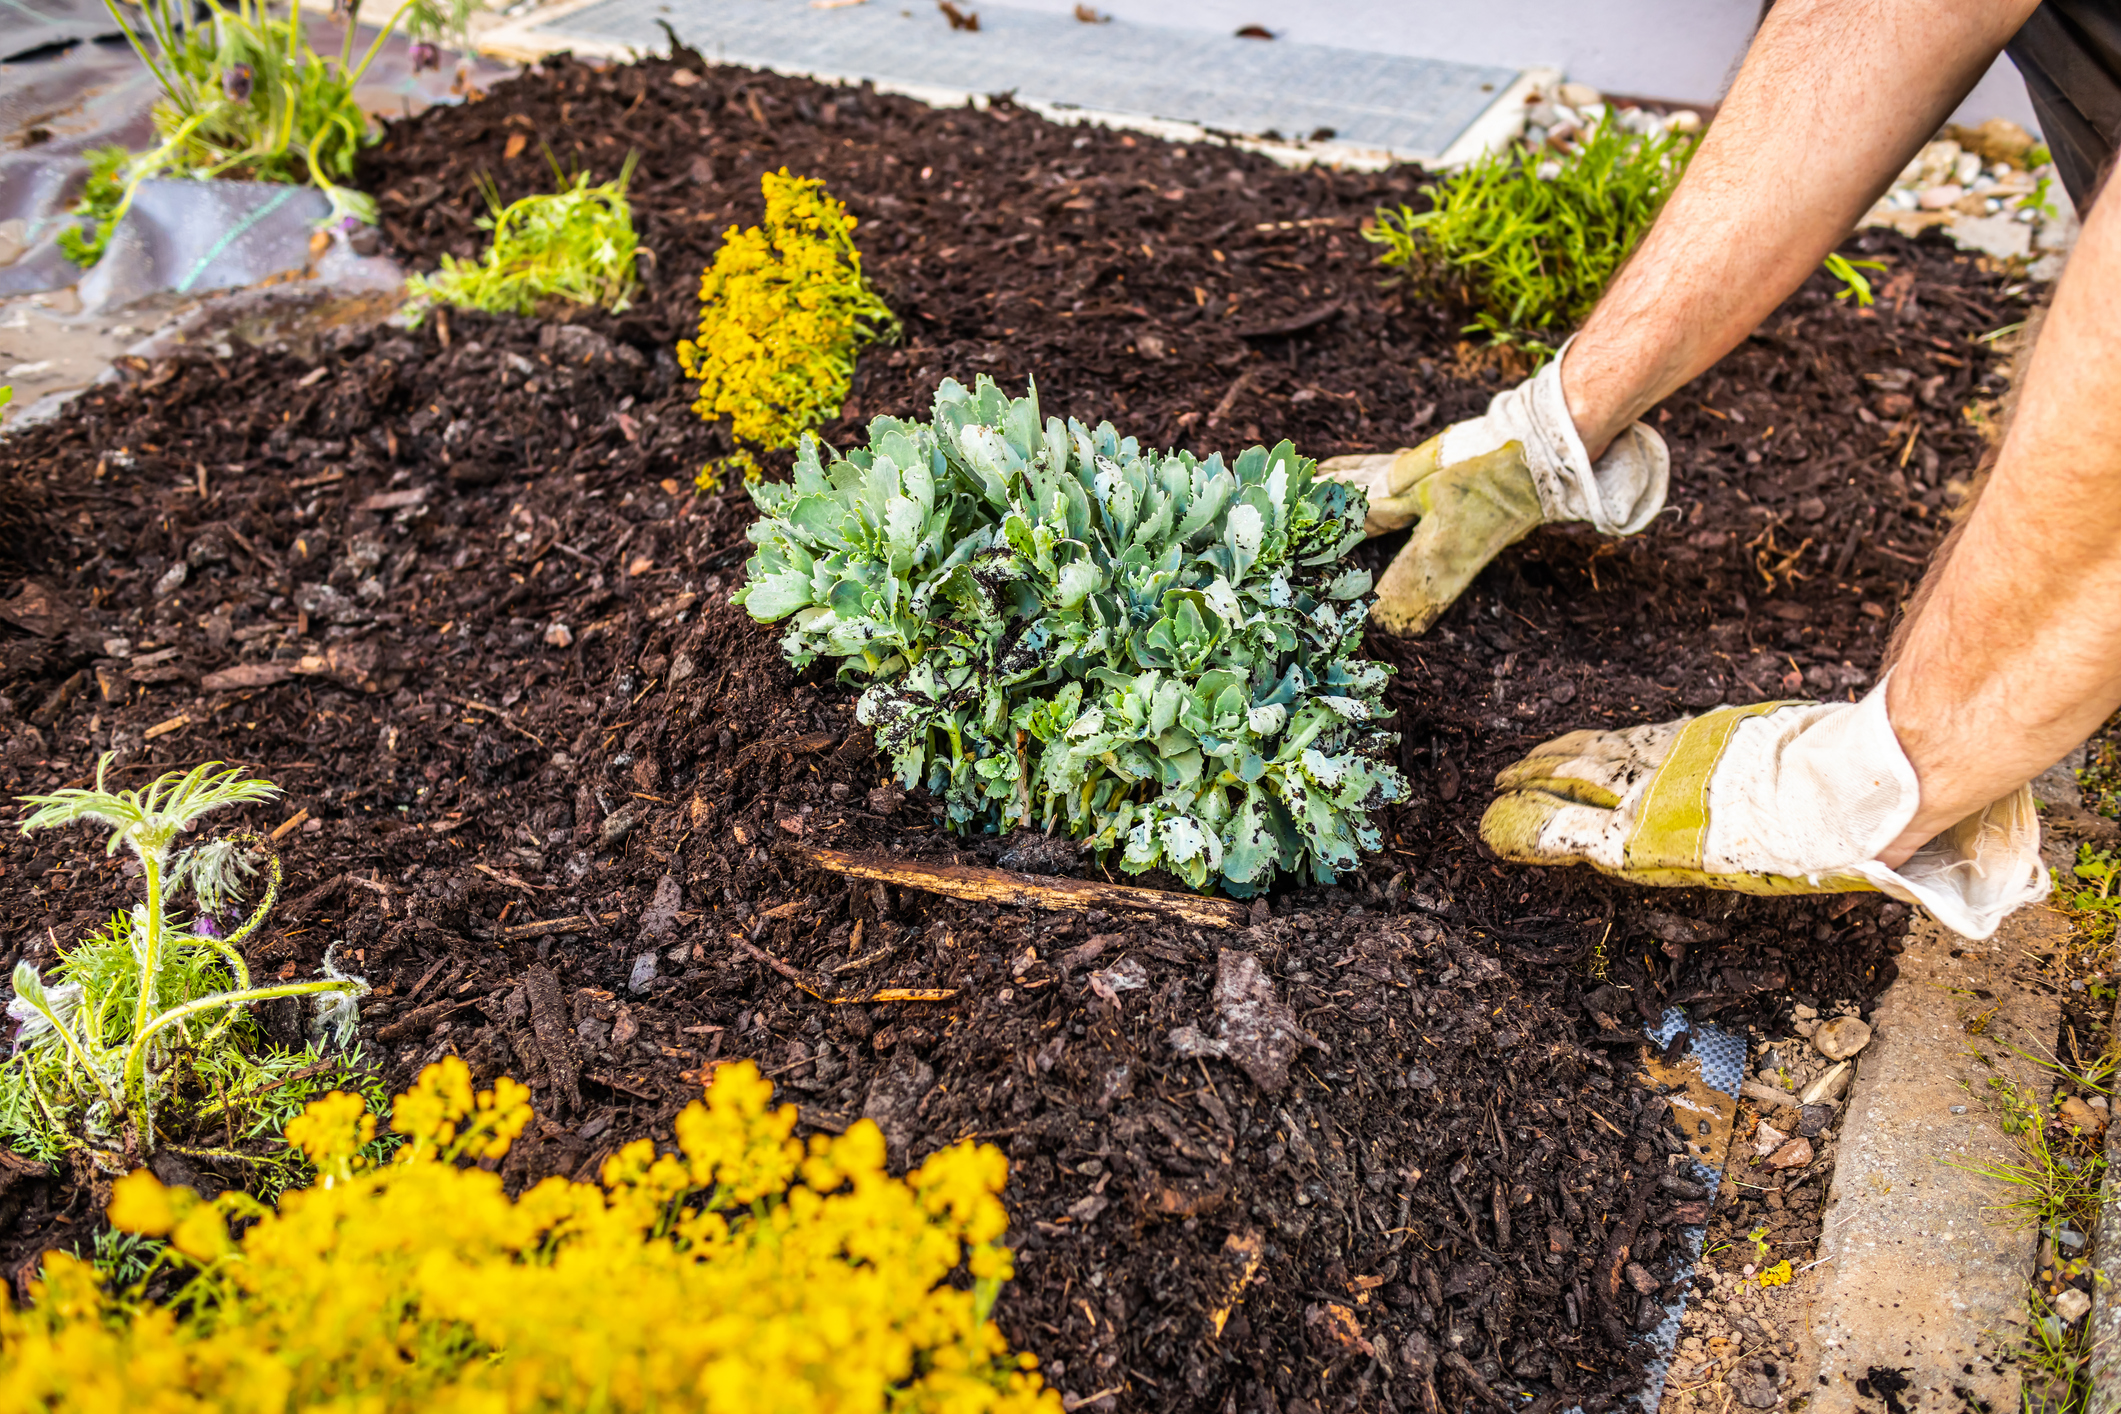 Installing weed control fabric material and bark mulch in a residential garden to control weed spreading (Photo: iStock - brebca)